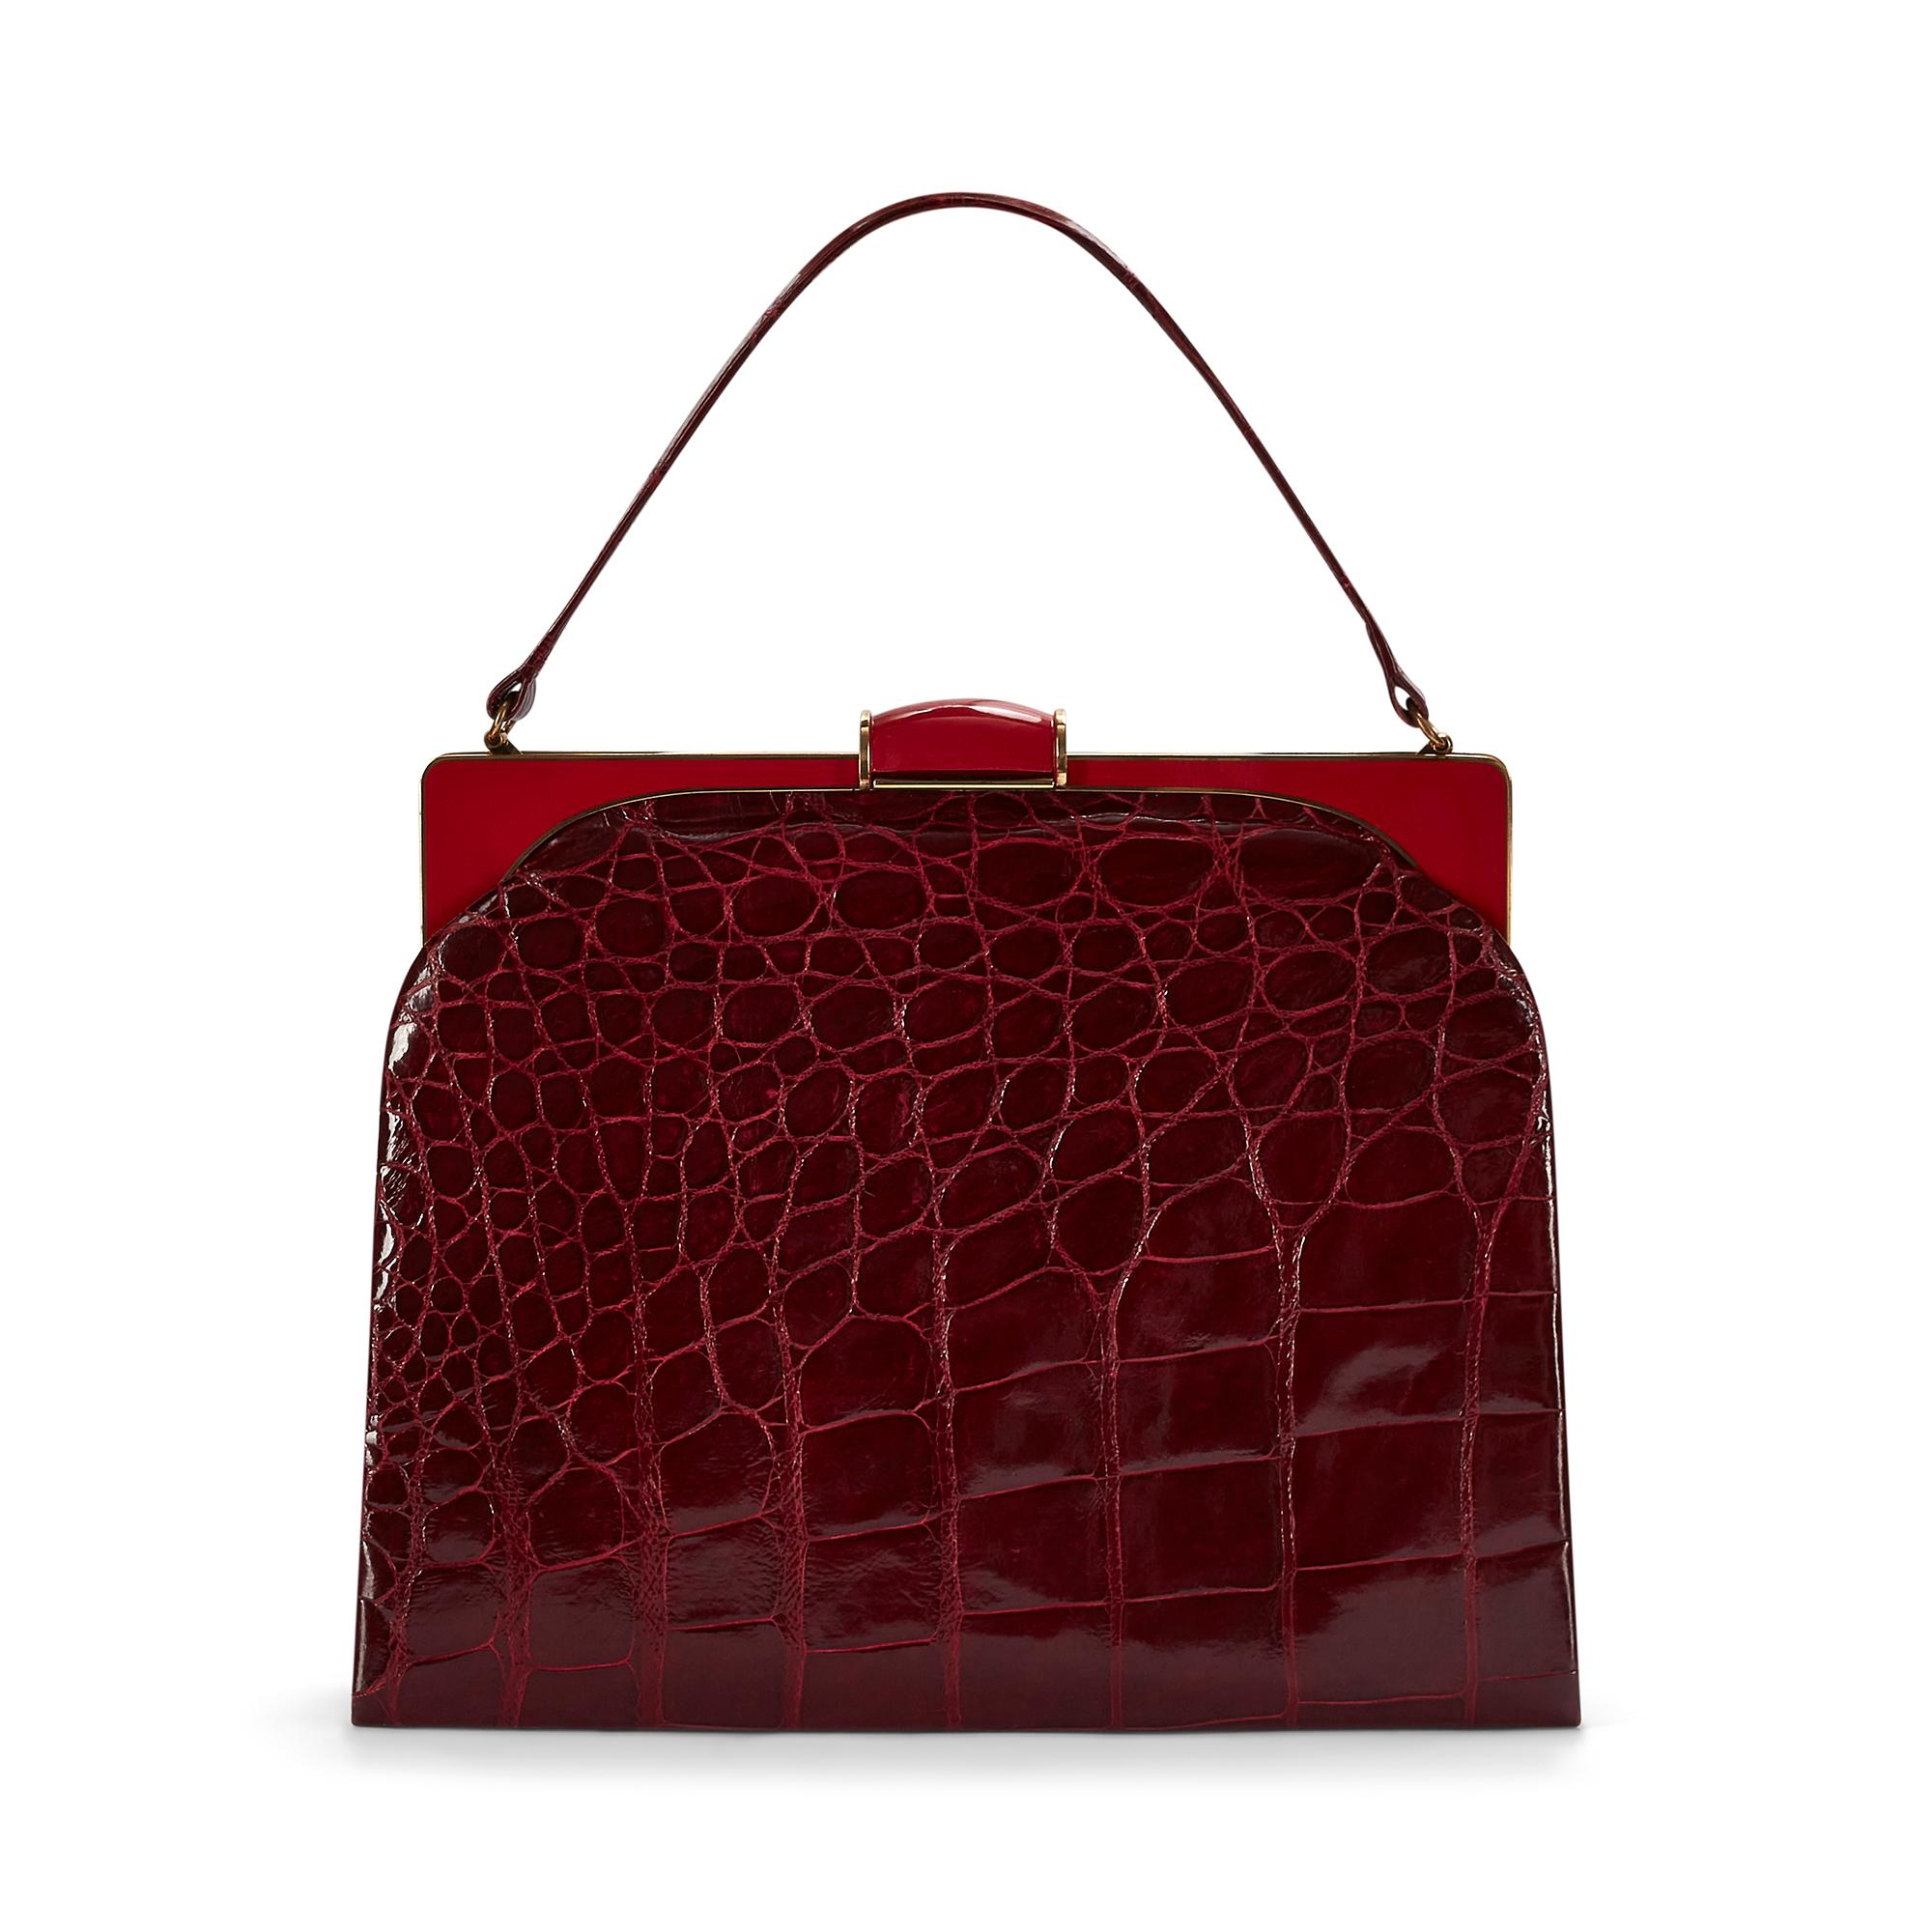 This elegant bag was made in the 1950s to early 1960s from fine dark red crocodile leather. The stiff boxy shape adds an easy formality, whilst the gold and red-tone enamel hardware and clasp make this a glamorous choice of bag for a daytime event.